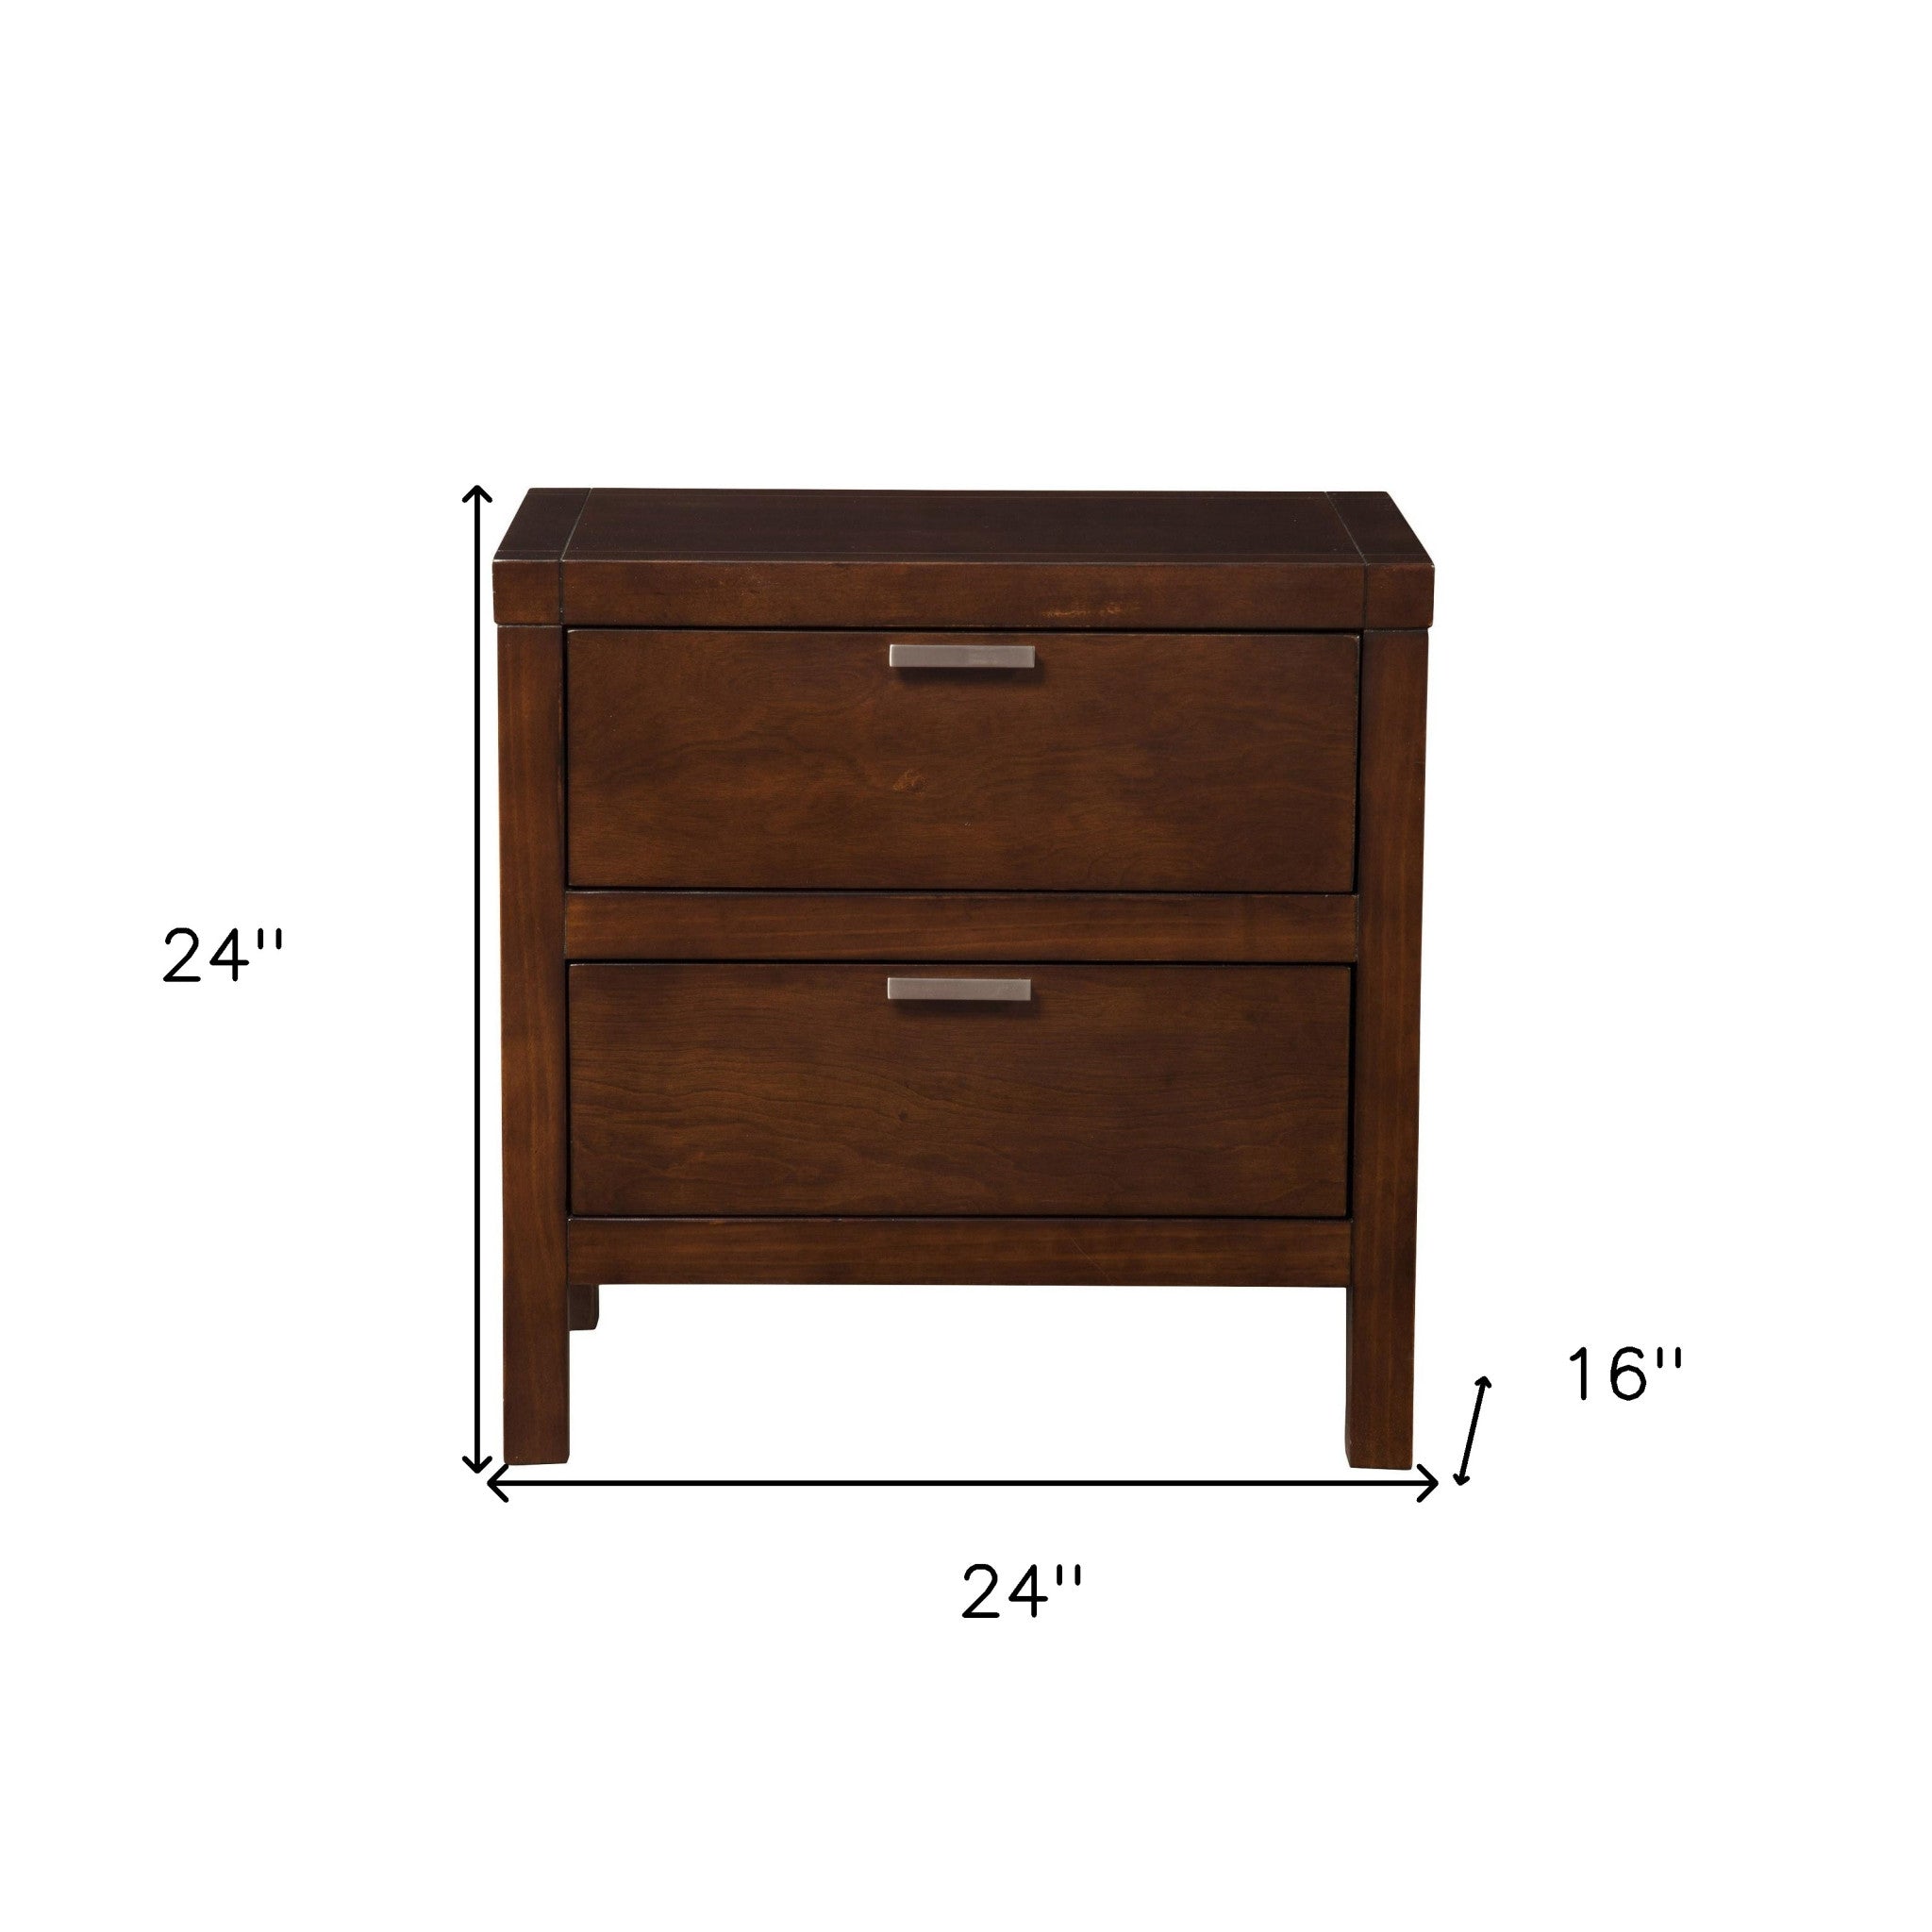 24" Brown Two Drawers Faux Wood Nightstand